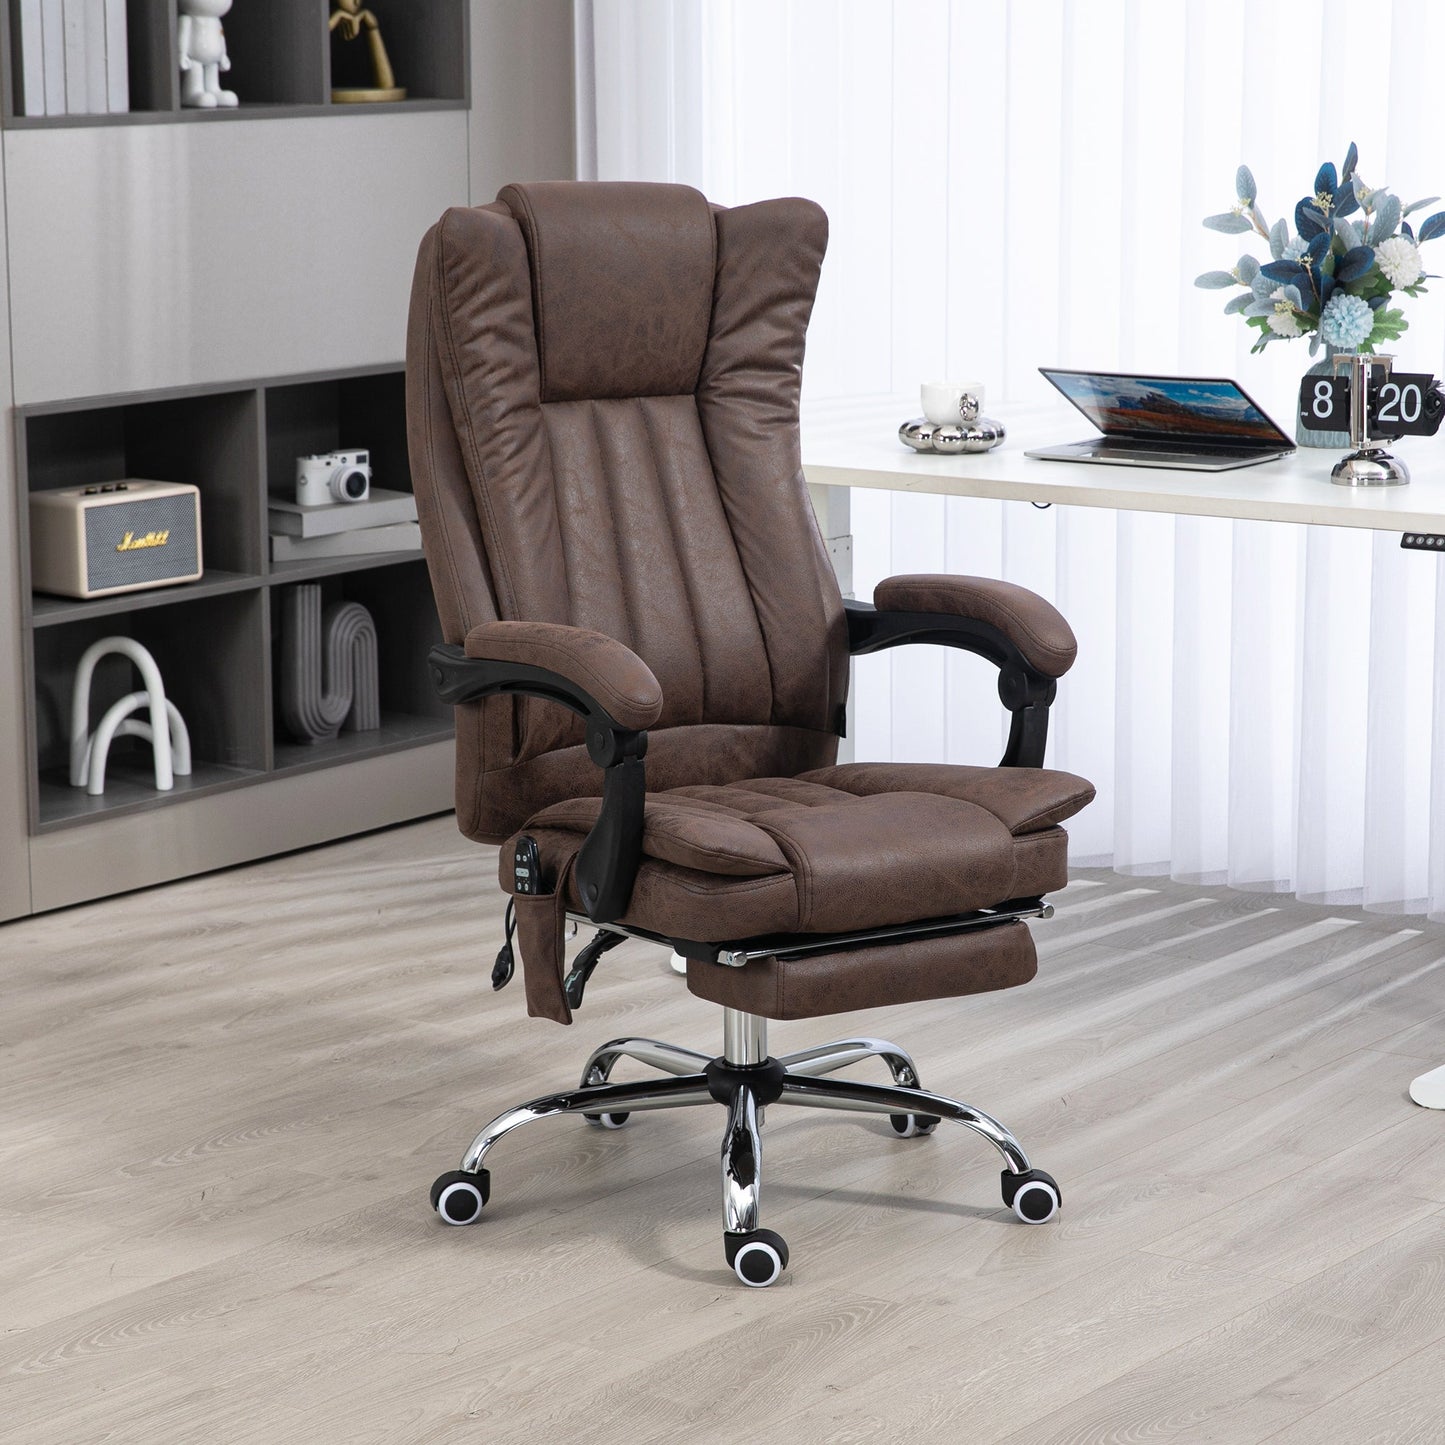 Vinsetto Microfiber Office Chair, High Back Computer Chair with 6 Point Massage, Heat, Adjustable Height and Retractable Footrest, Coffee